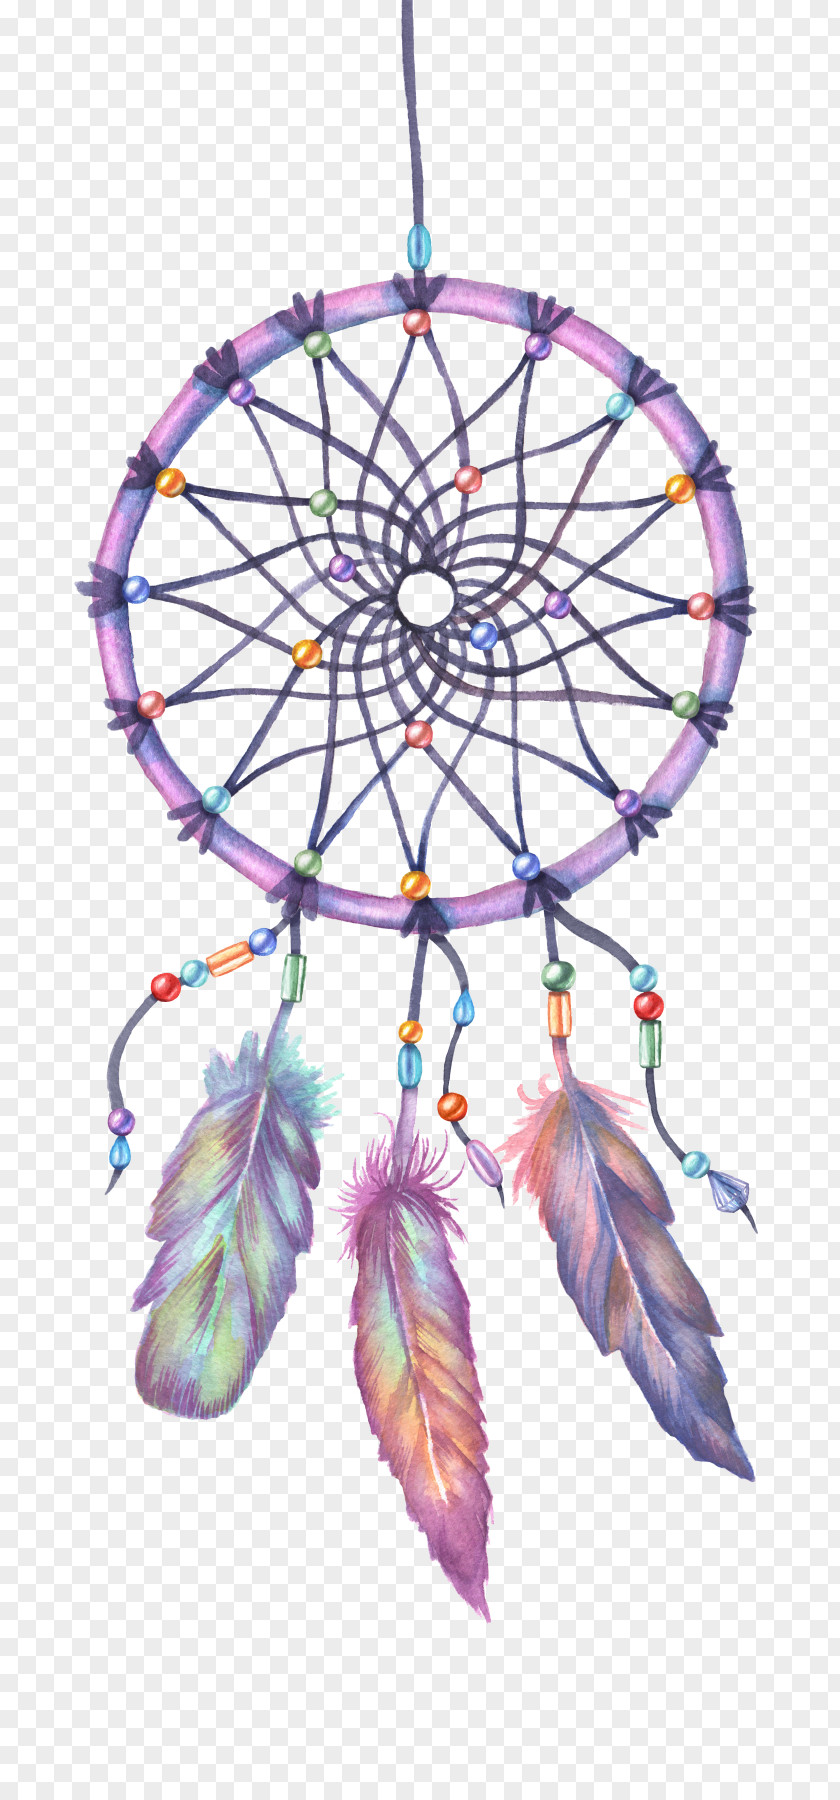 Purple Dreamcatcher Drawing Watercolor Painting Illustration PNG